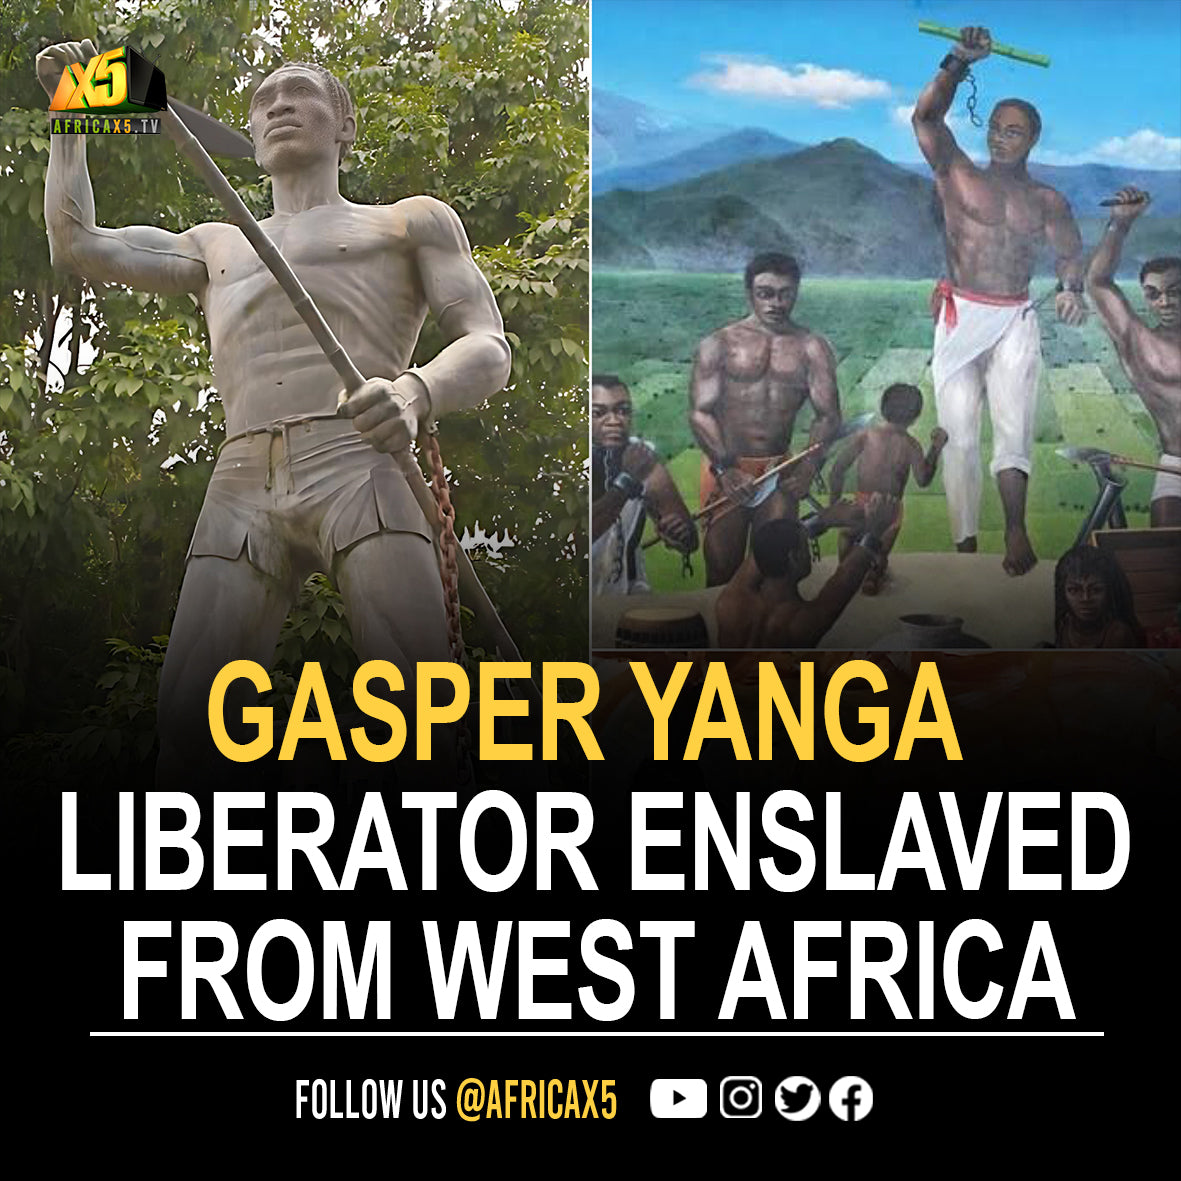 Gaspar Yanga was a liberator and one of Mexico’s heroes, enslaved from West Africa.